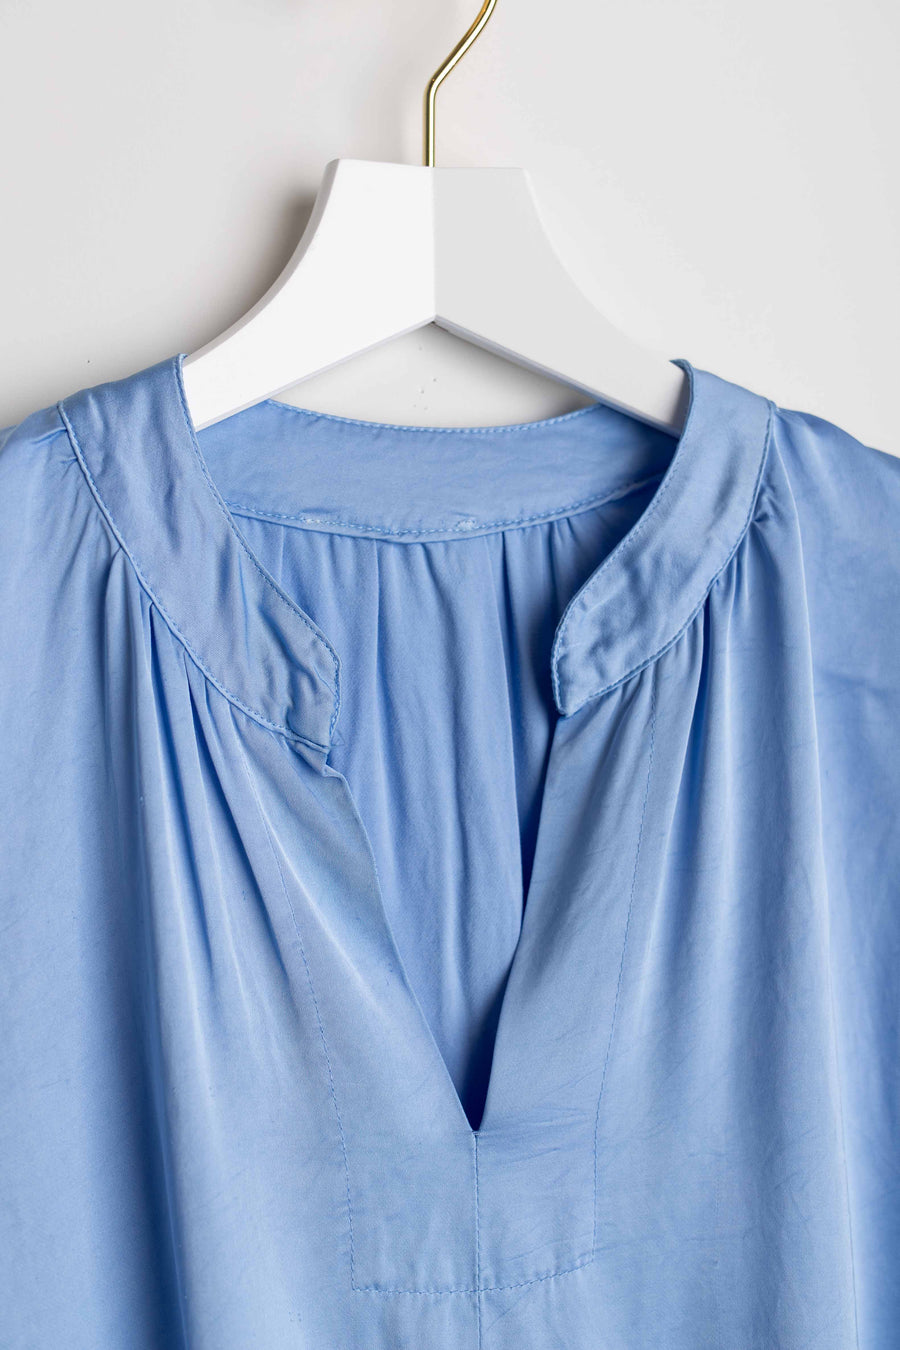 jackieandkate Top cropped Satin bluette